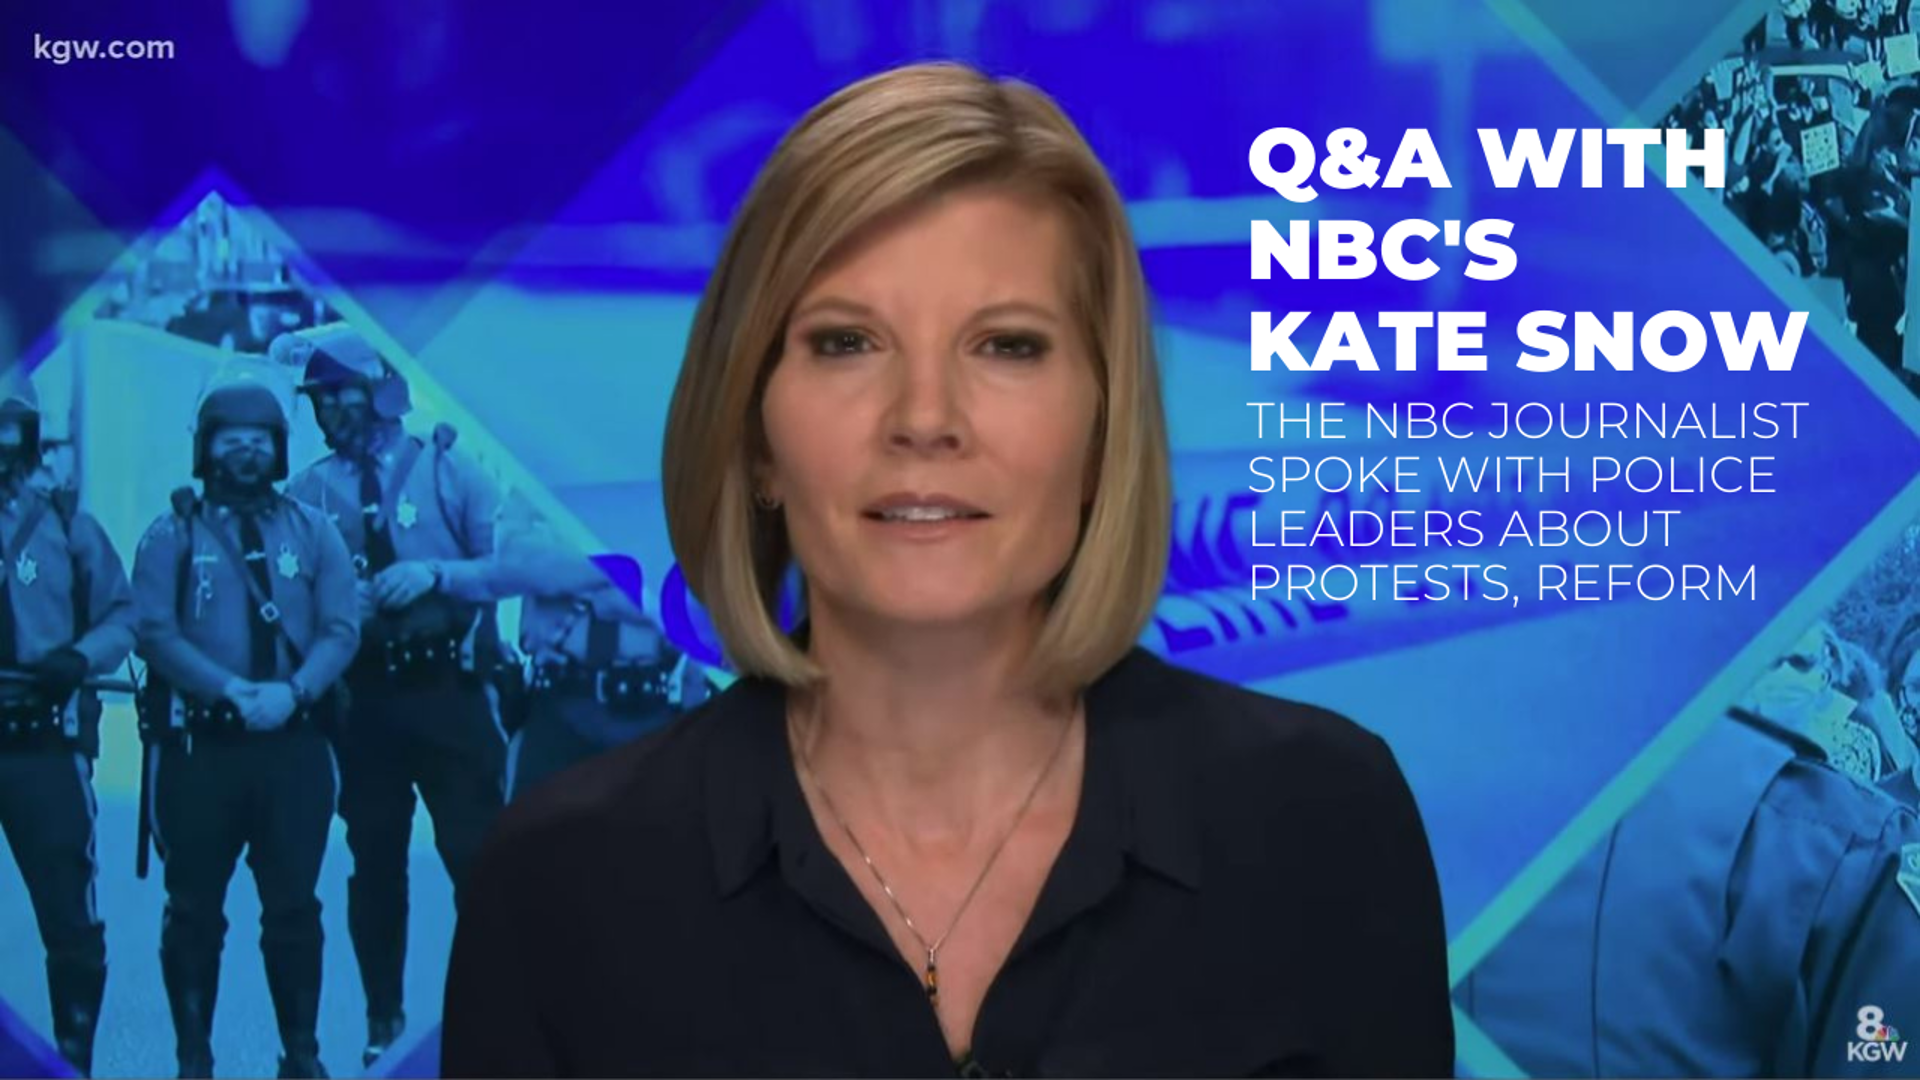 KGW's Brenda Braxton spoke to NBC's Kate Snow about her roundtable discussion with police leaders, including former Portland Police Bureau Chief Jami Resch.